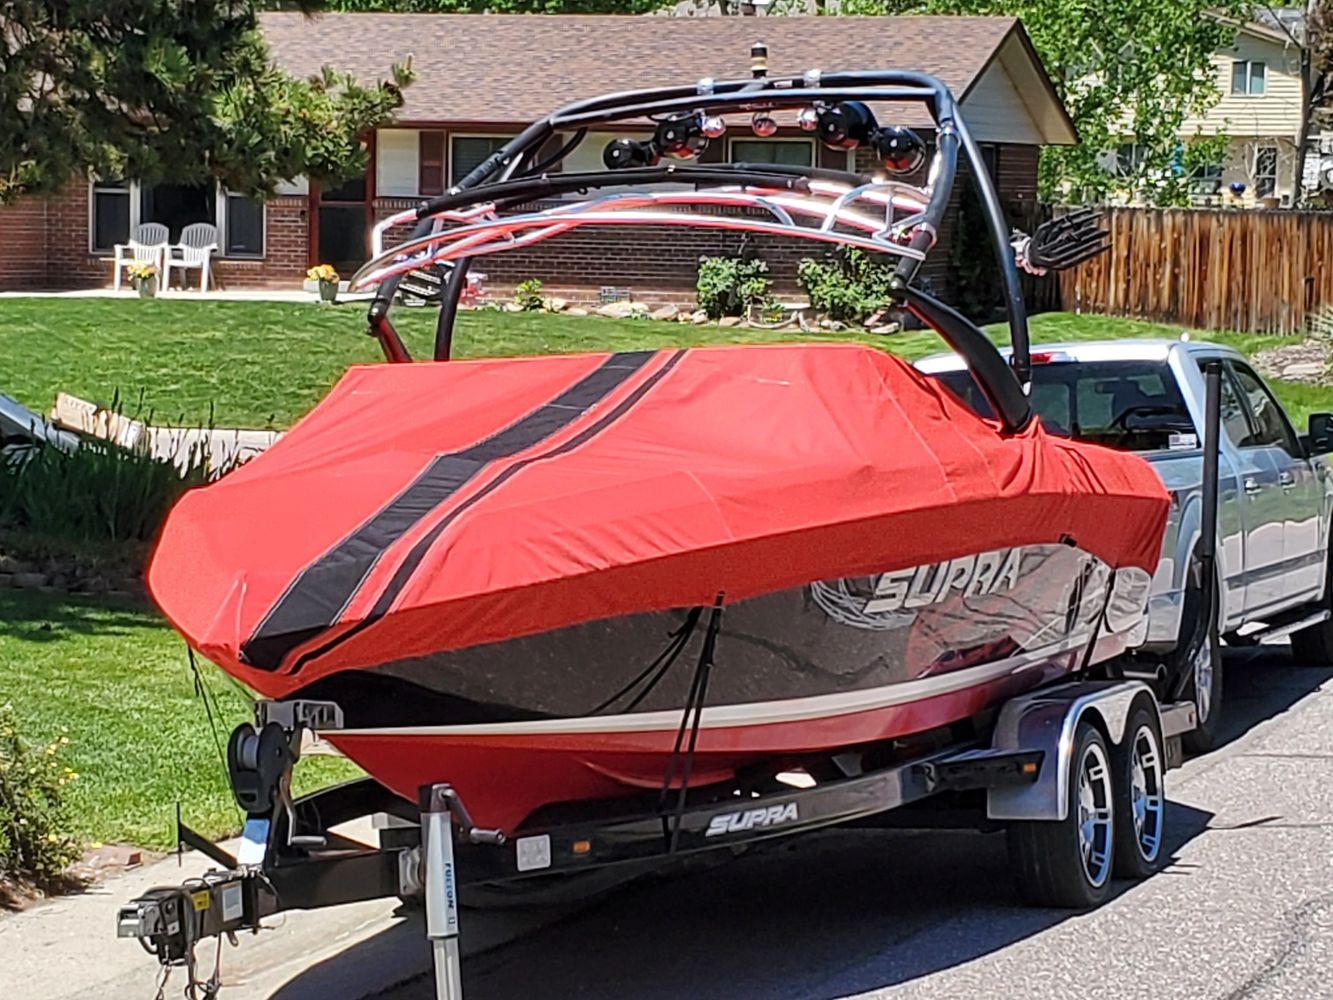 Armor Covers - Custom Boat Covers, Boat Covers, Boat Canvas